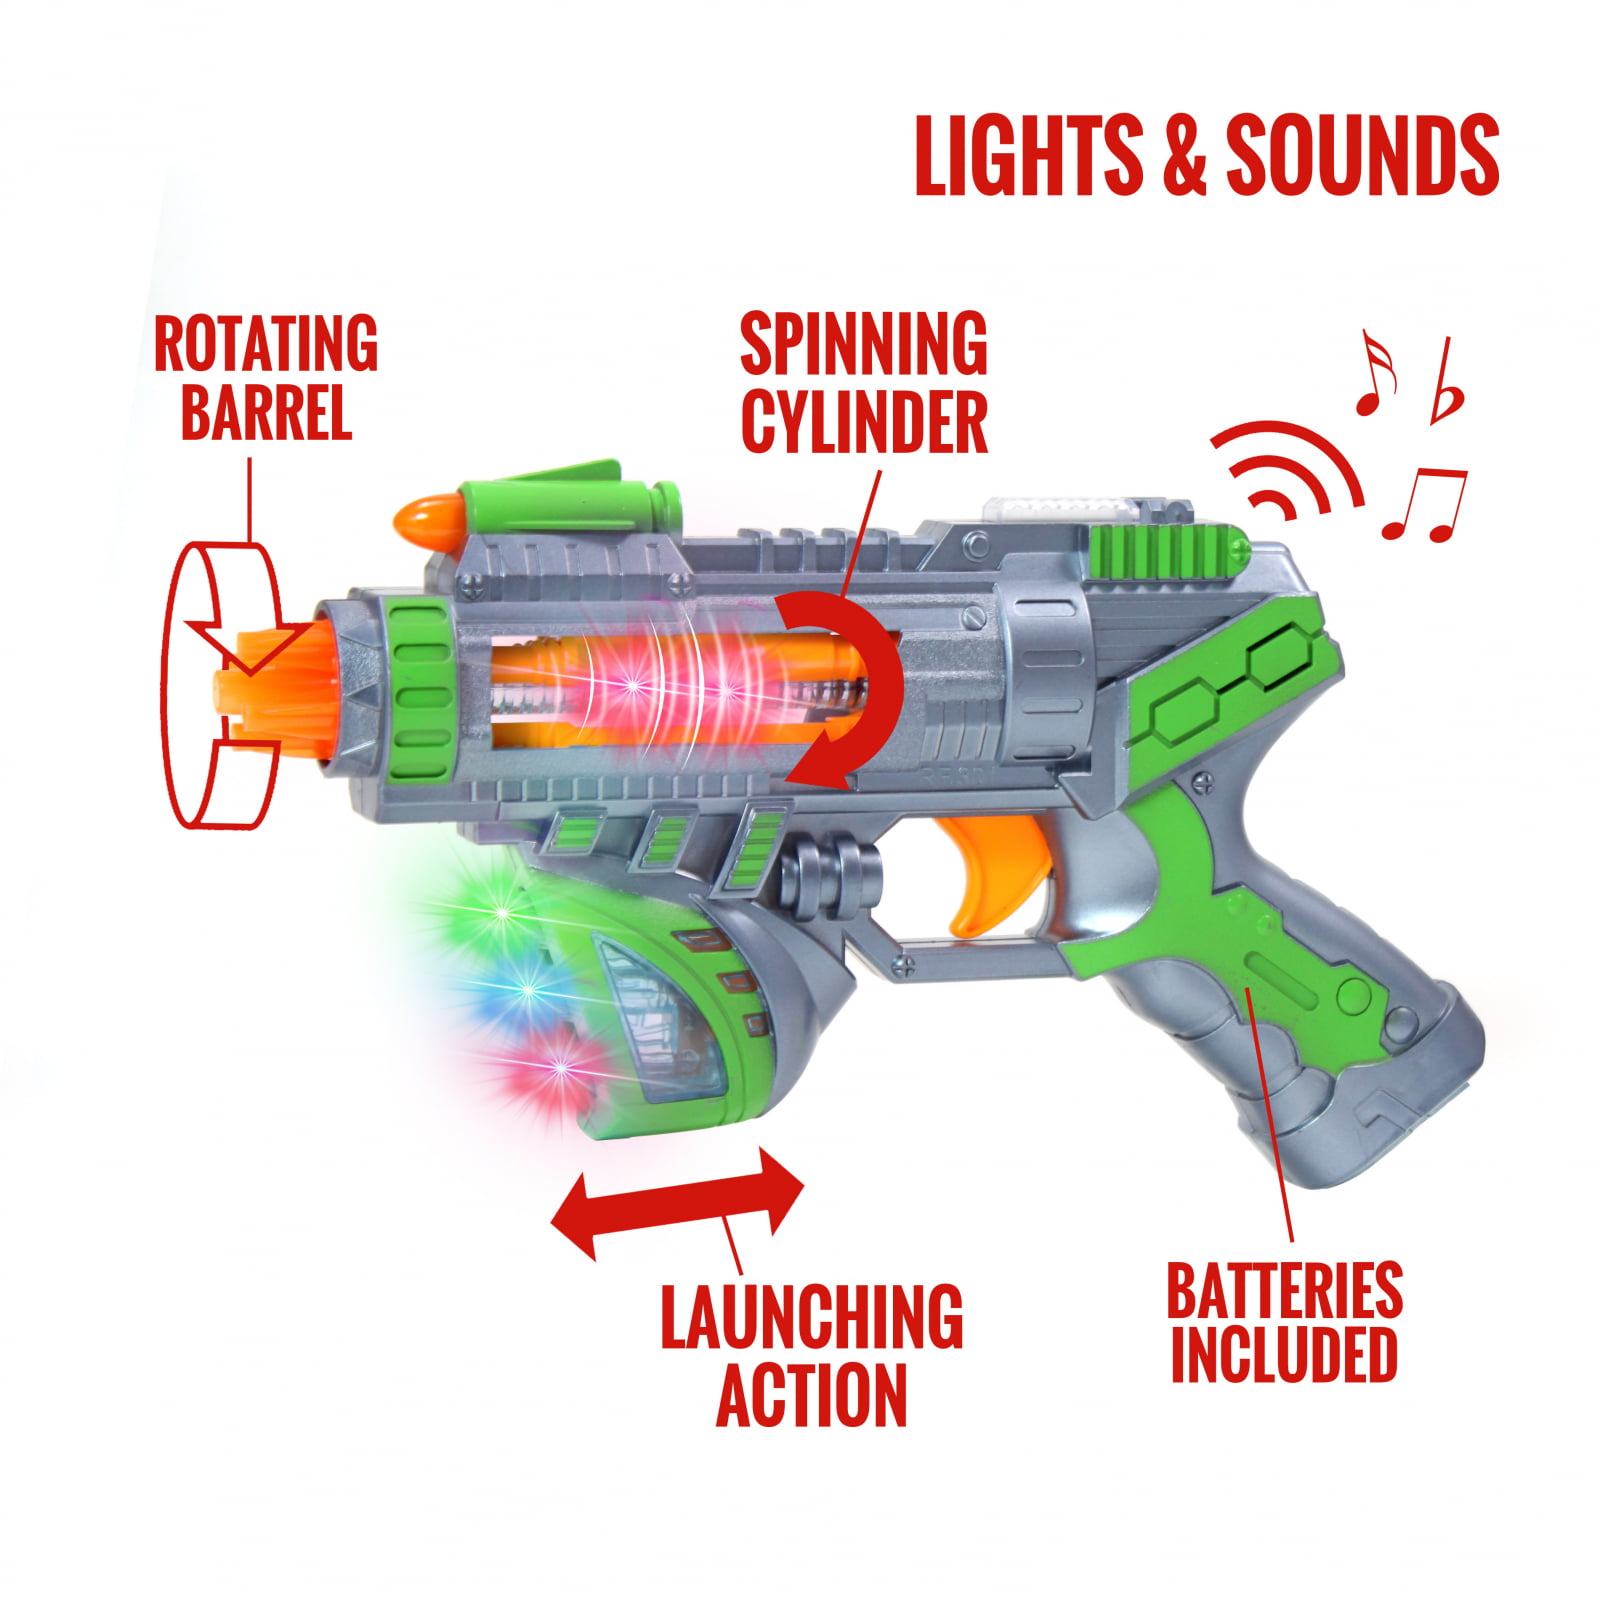 Light Up Flashing Barrel Roll Space Spin Gun With Sound 